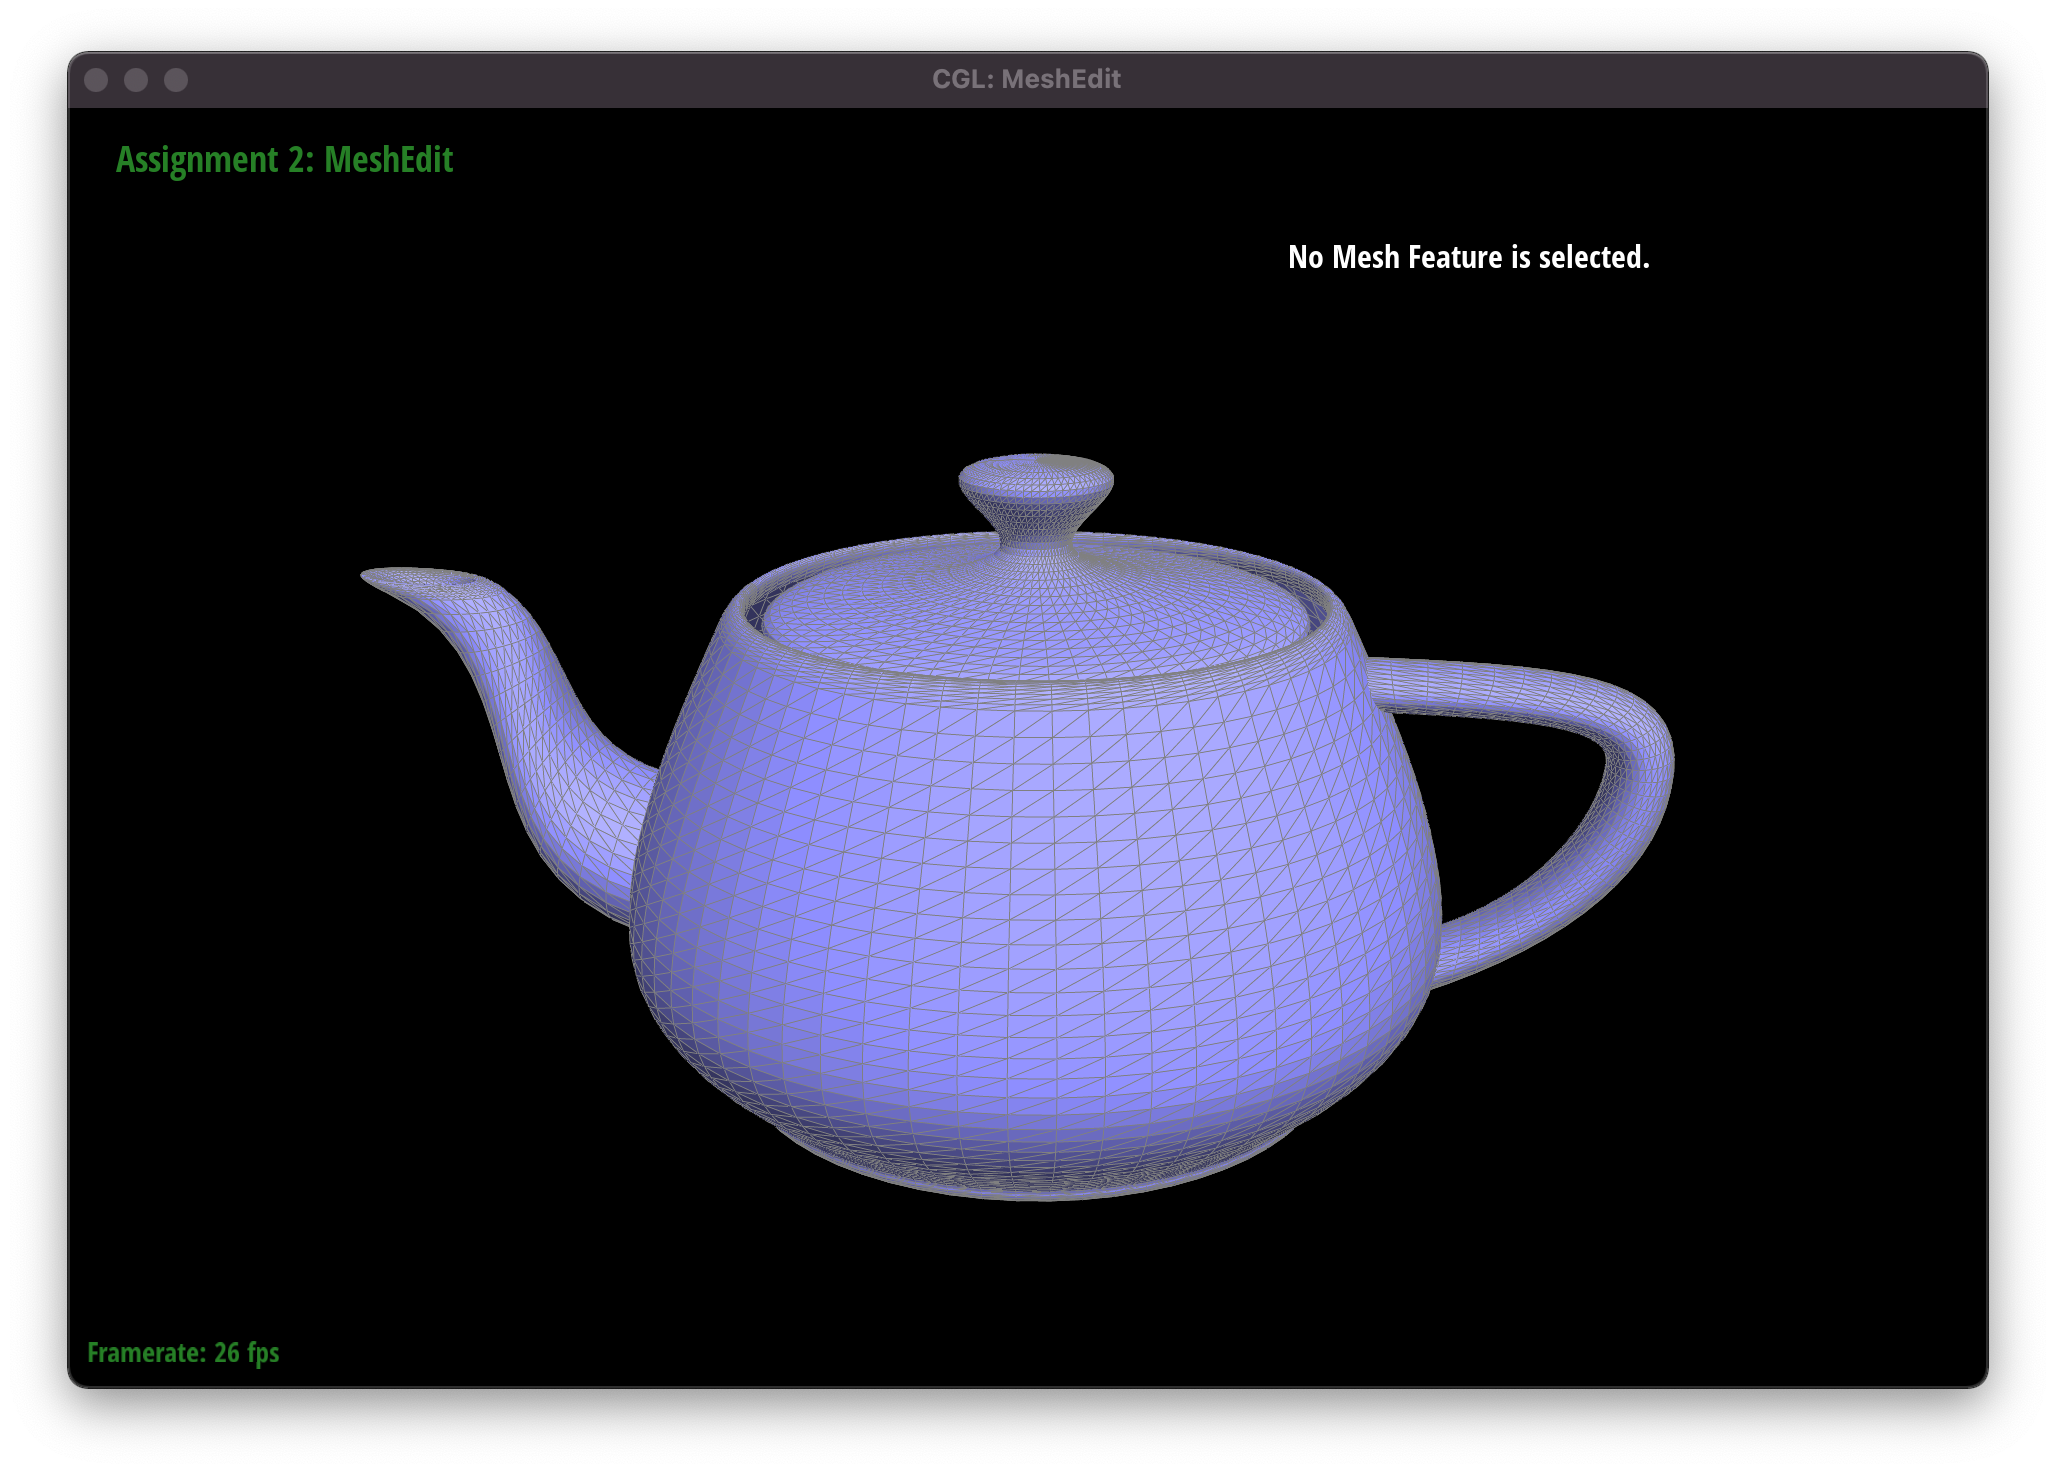 Teapot with Bezier surface